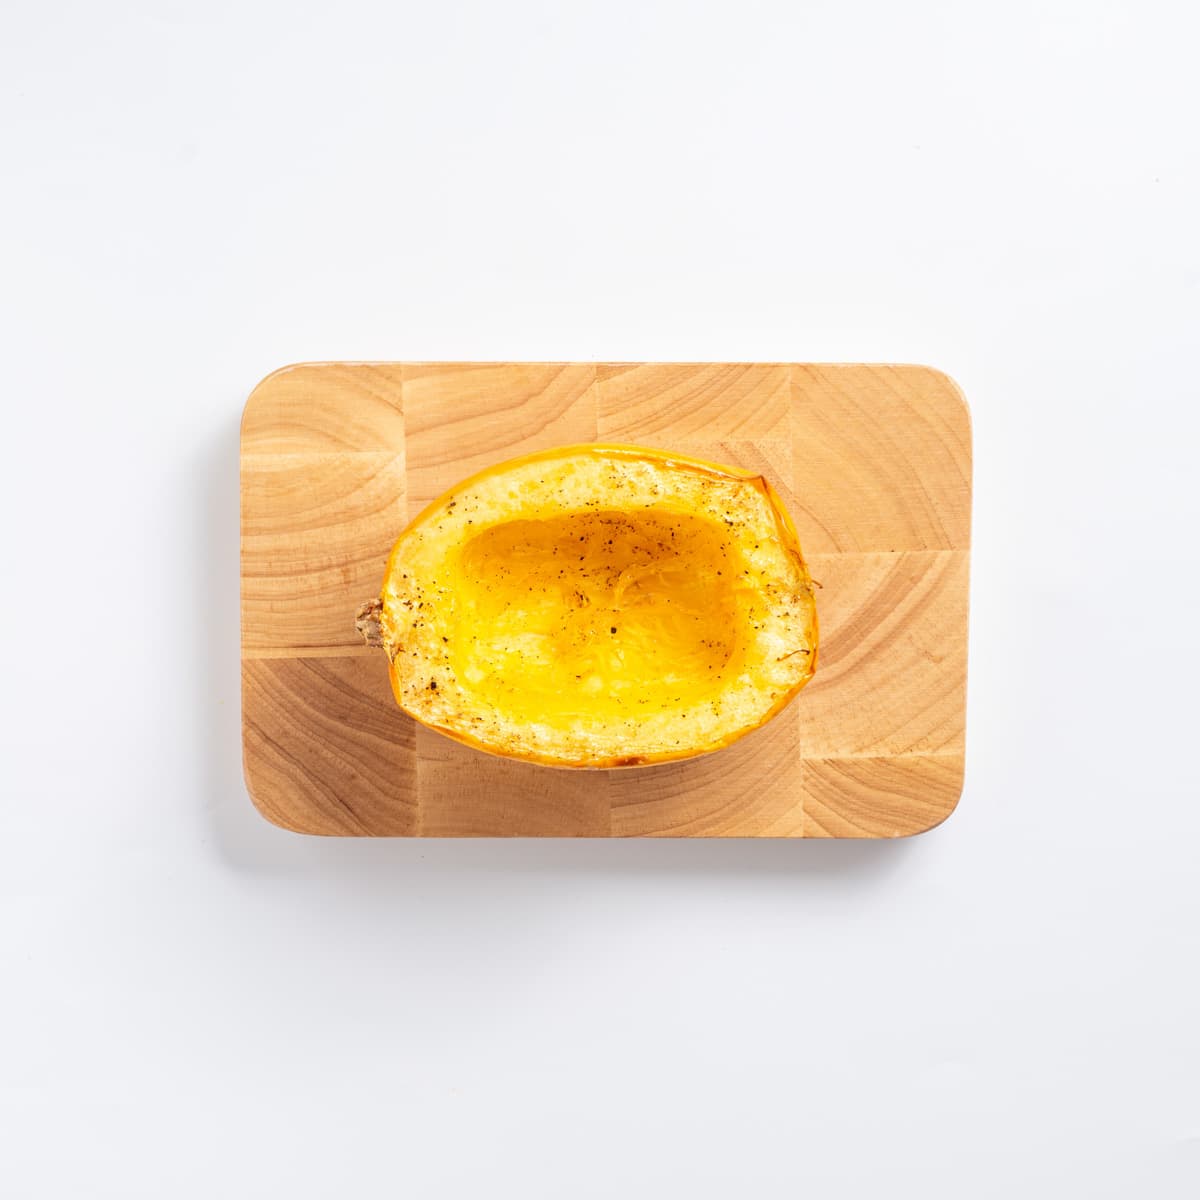 An overhead image of a fried spaghetti squash half, facing up on a cutting board.